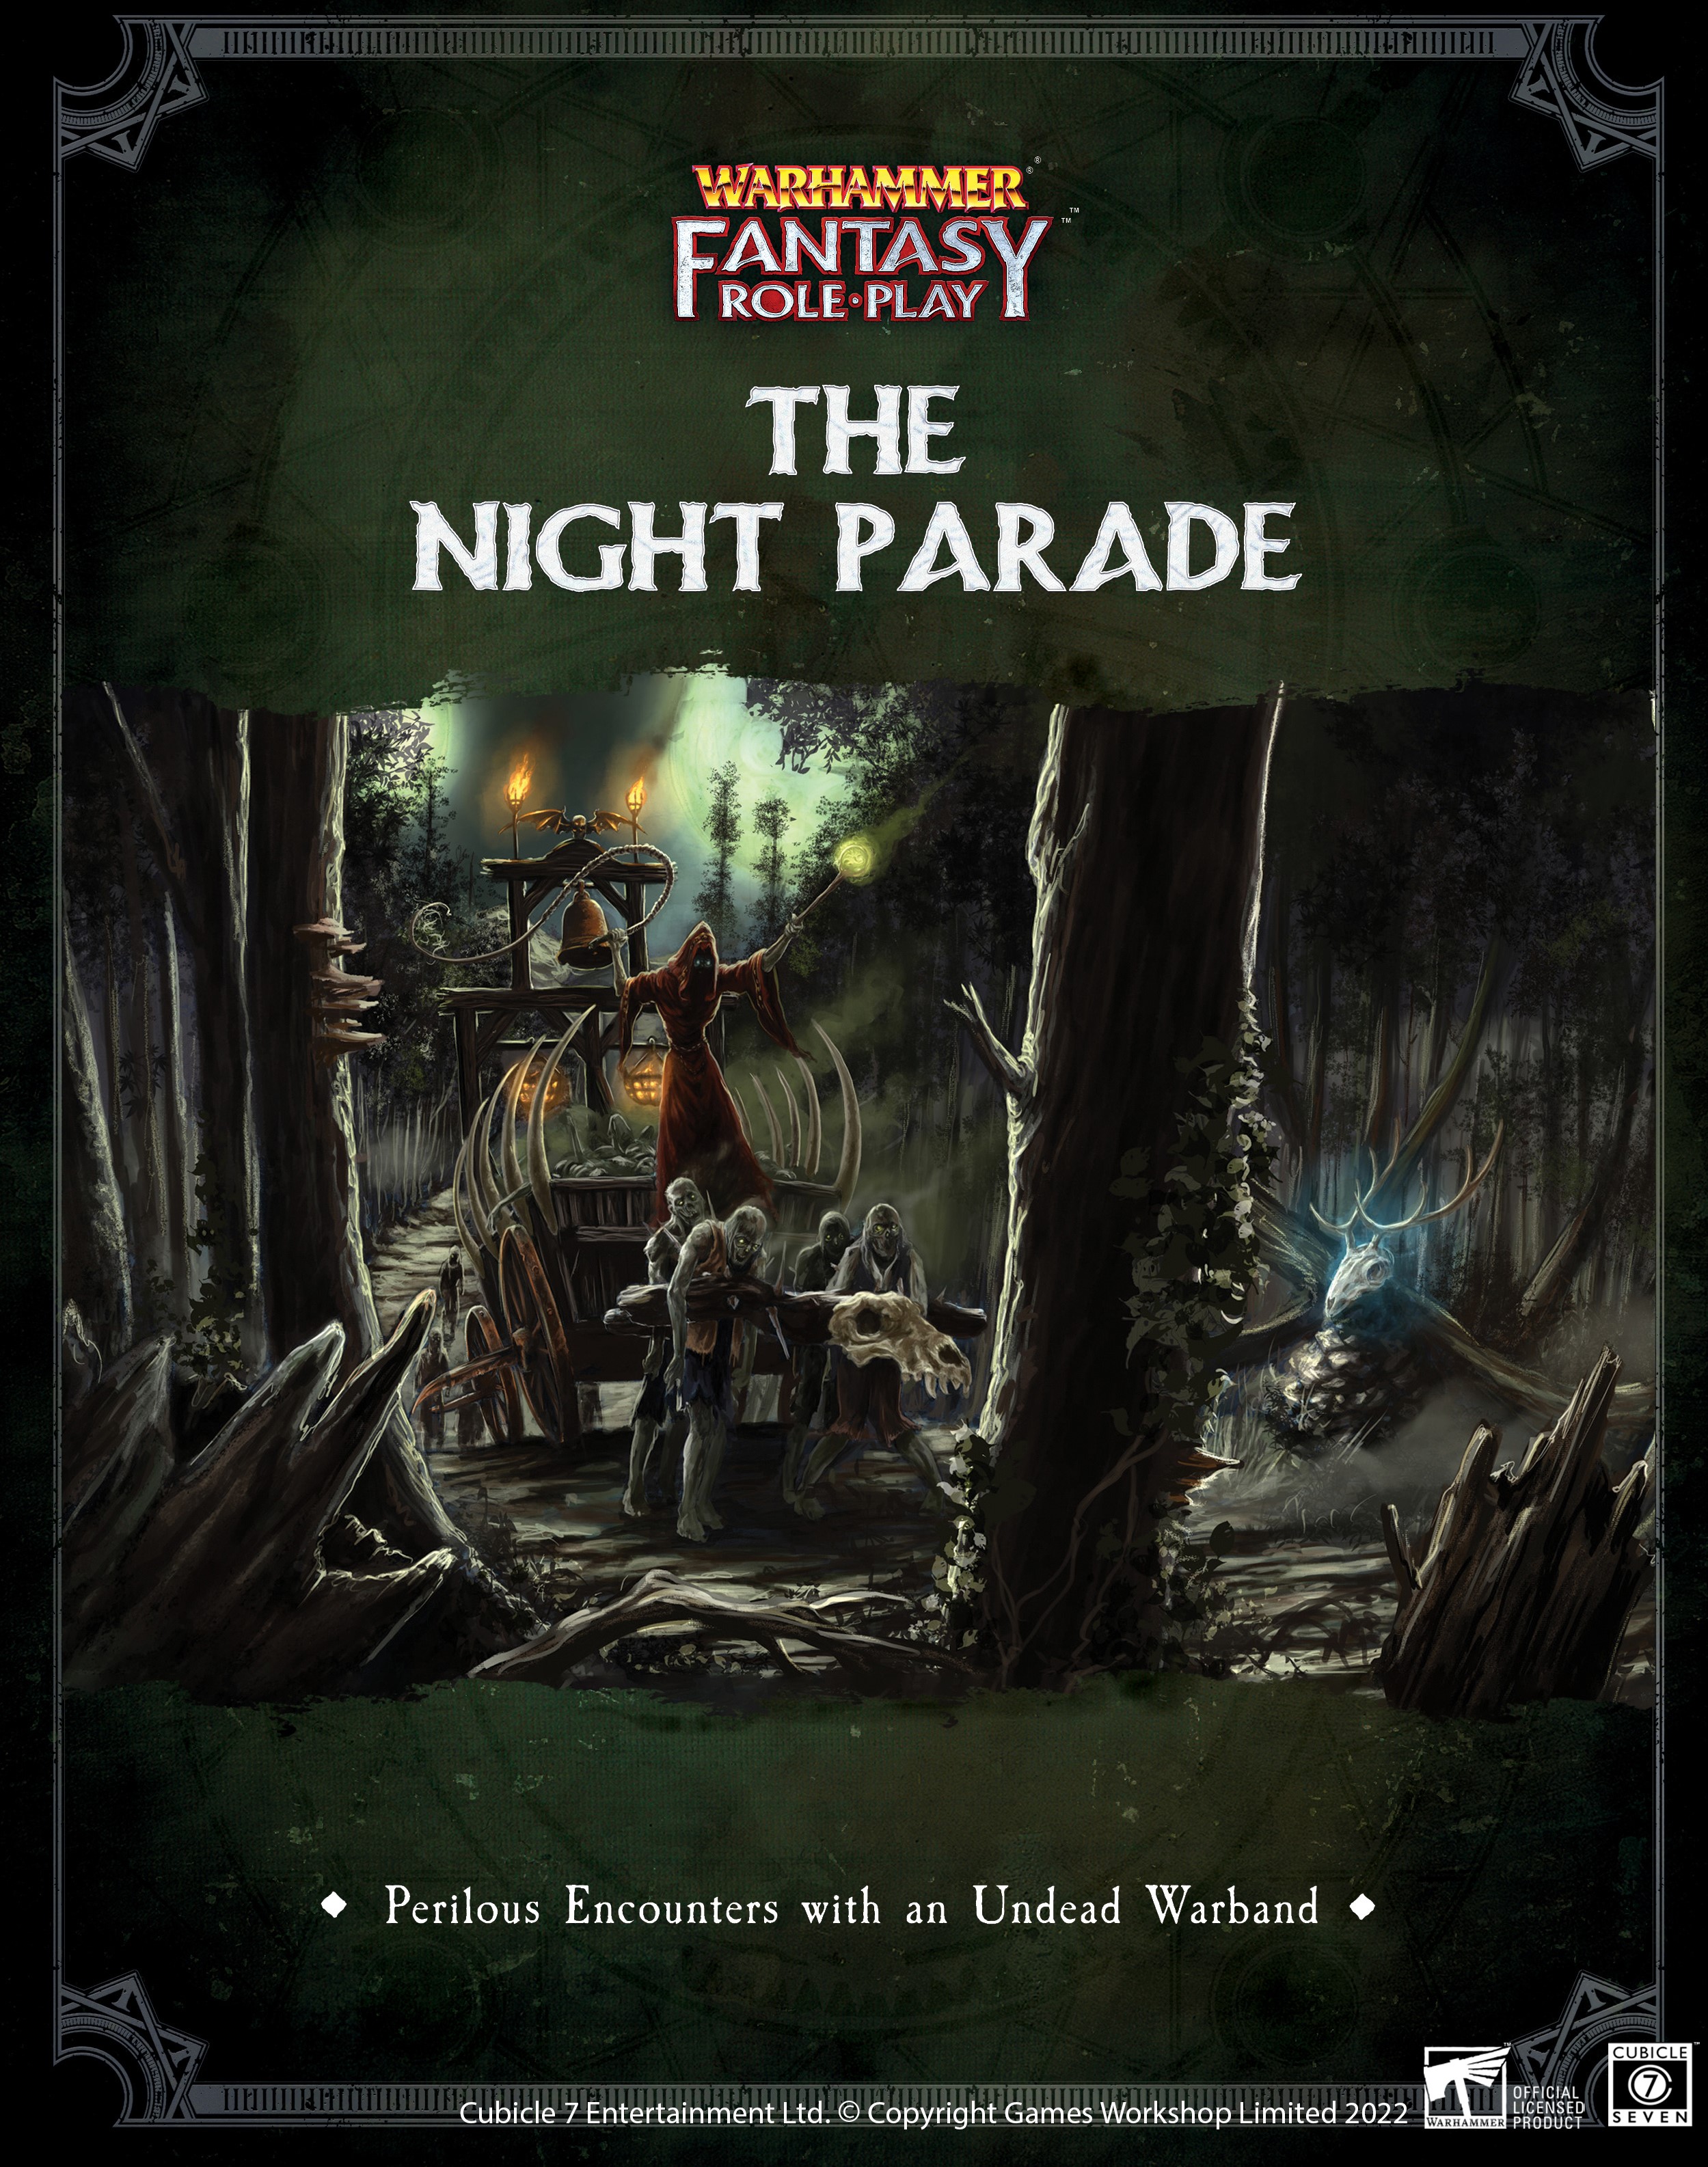 The Night Parade - Warhammer Fantasy Role-Play